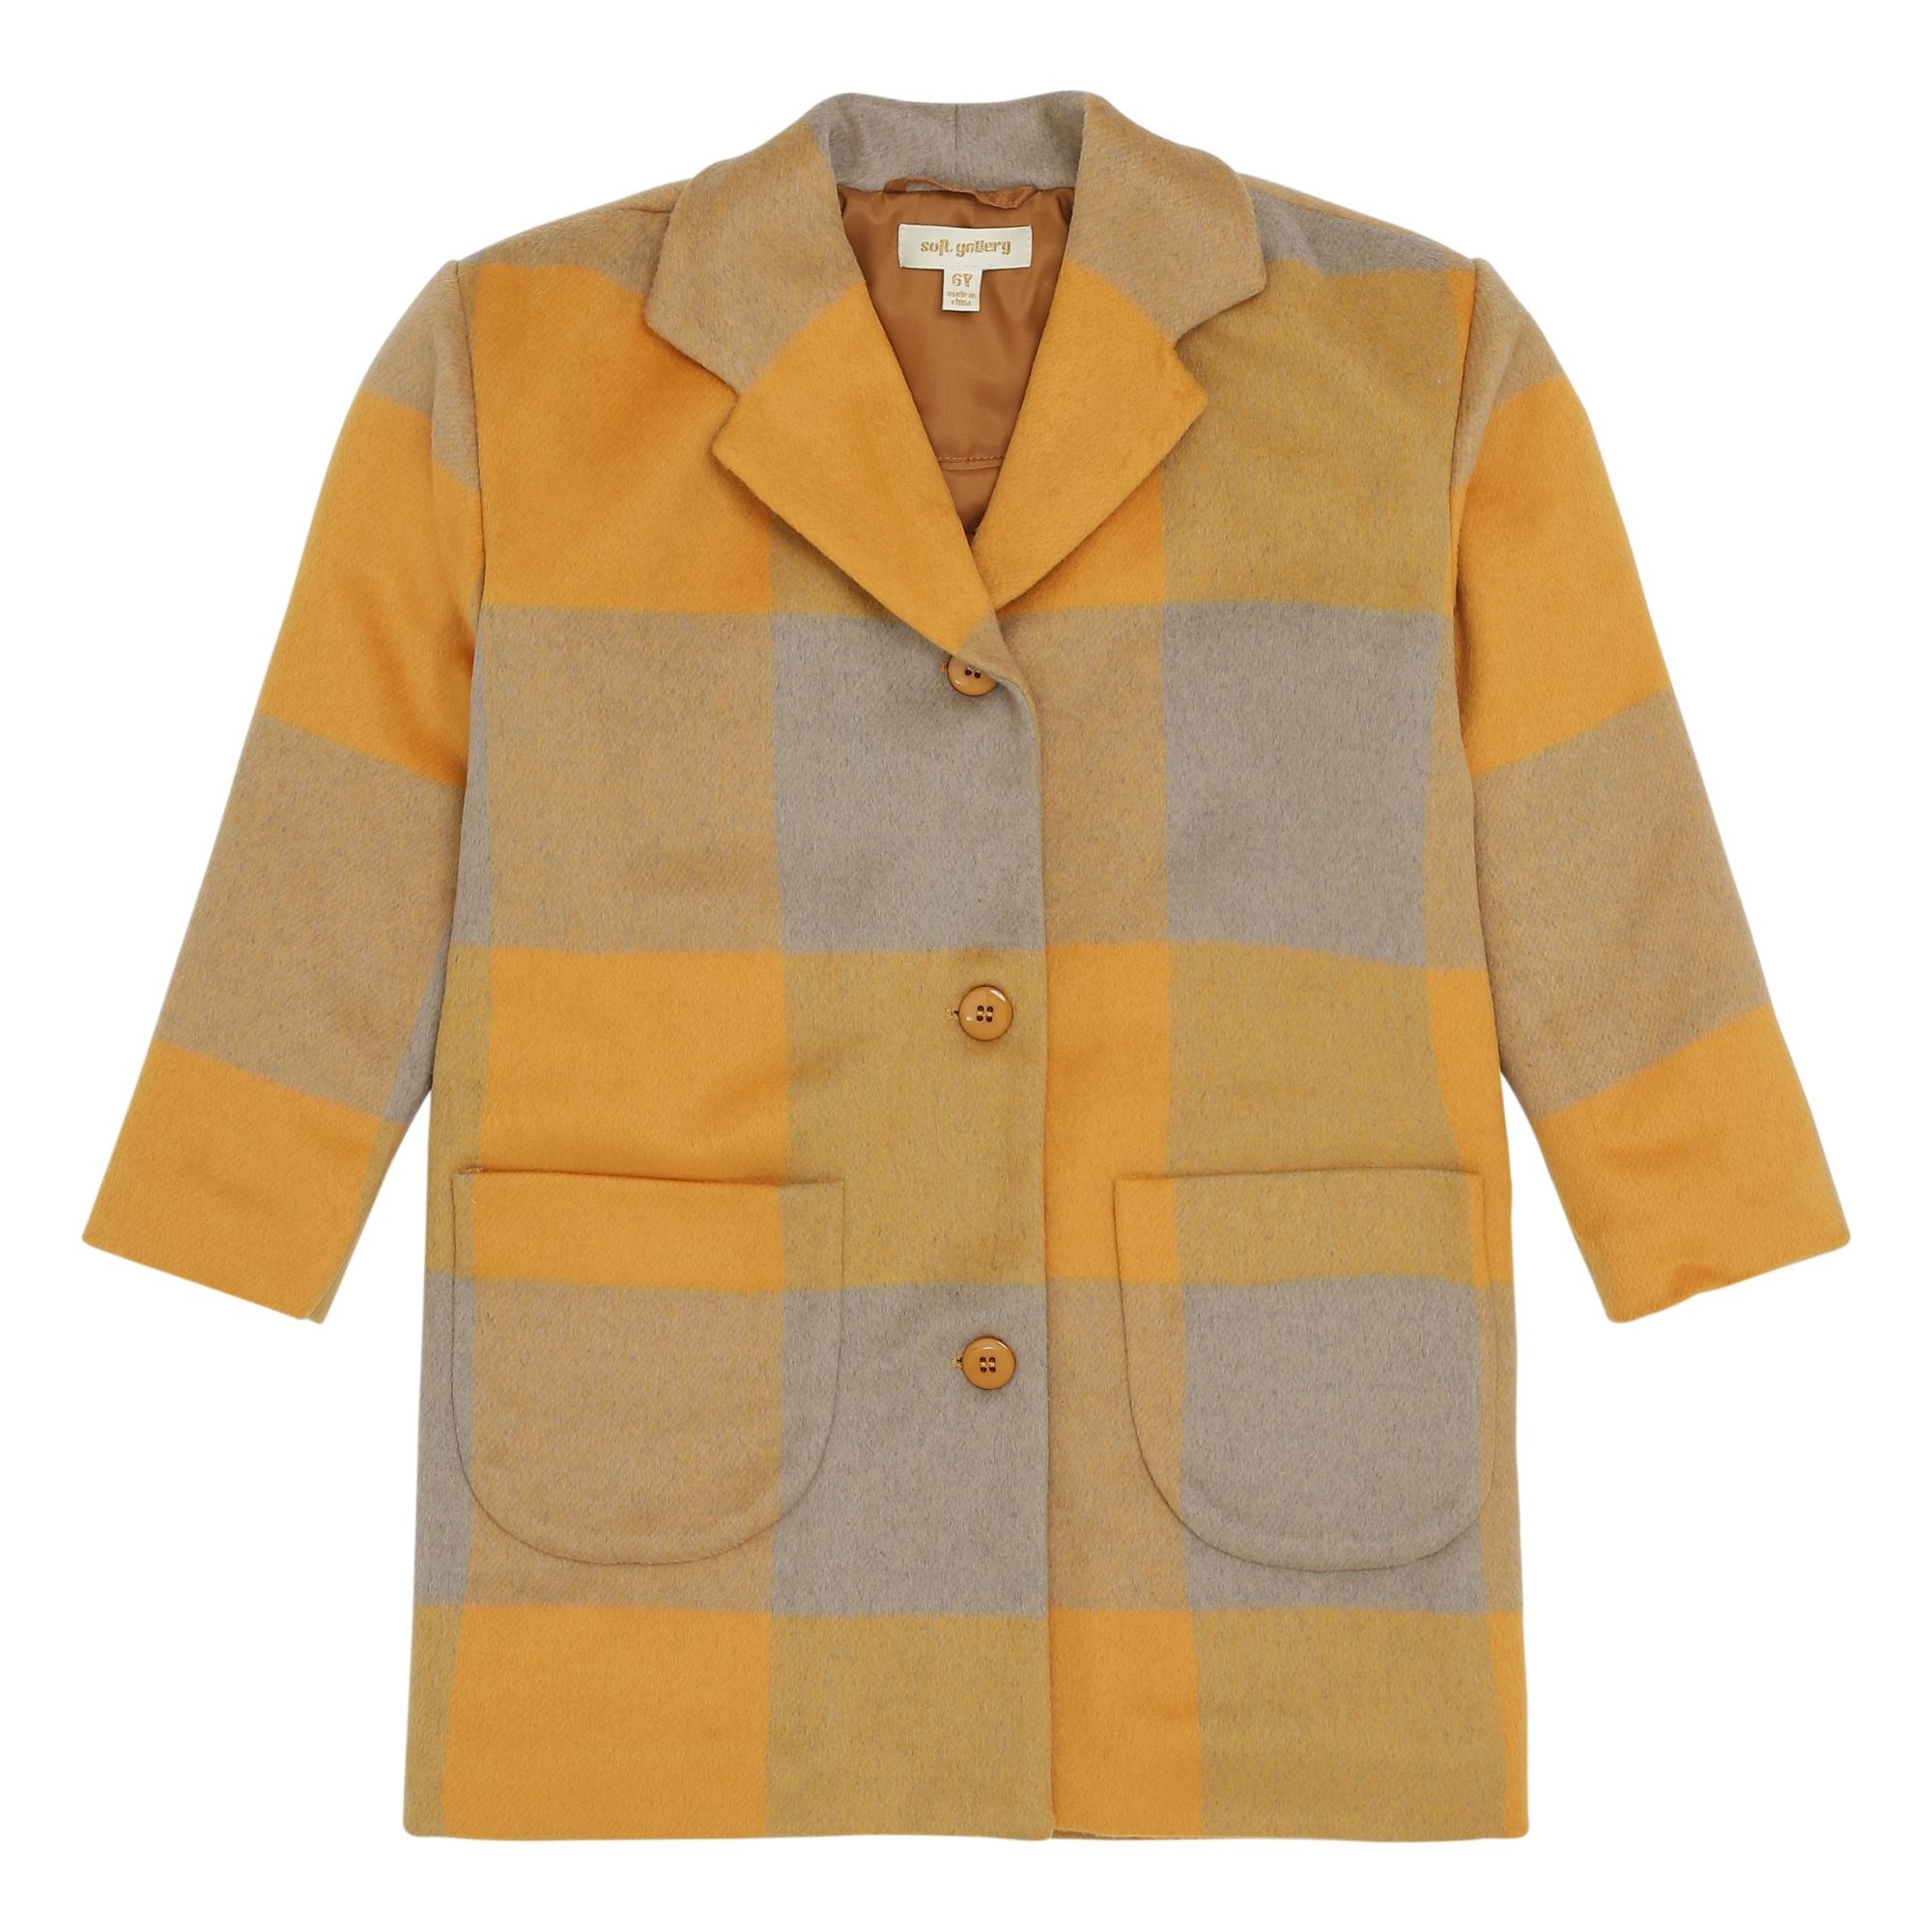 Soft Gallery - Manteau Eveleen Check - Fille - Jaune